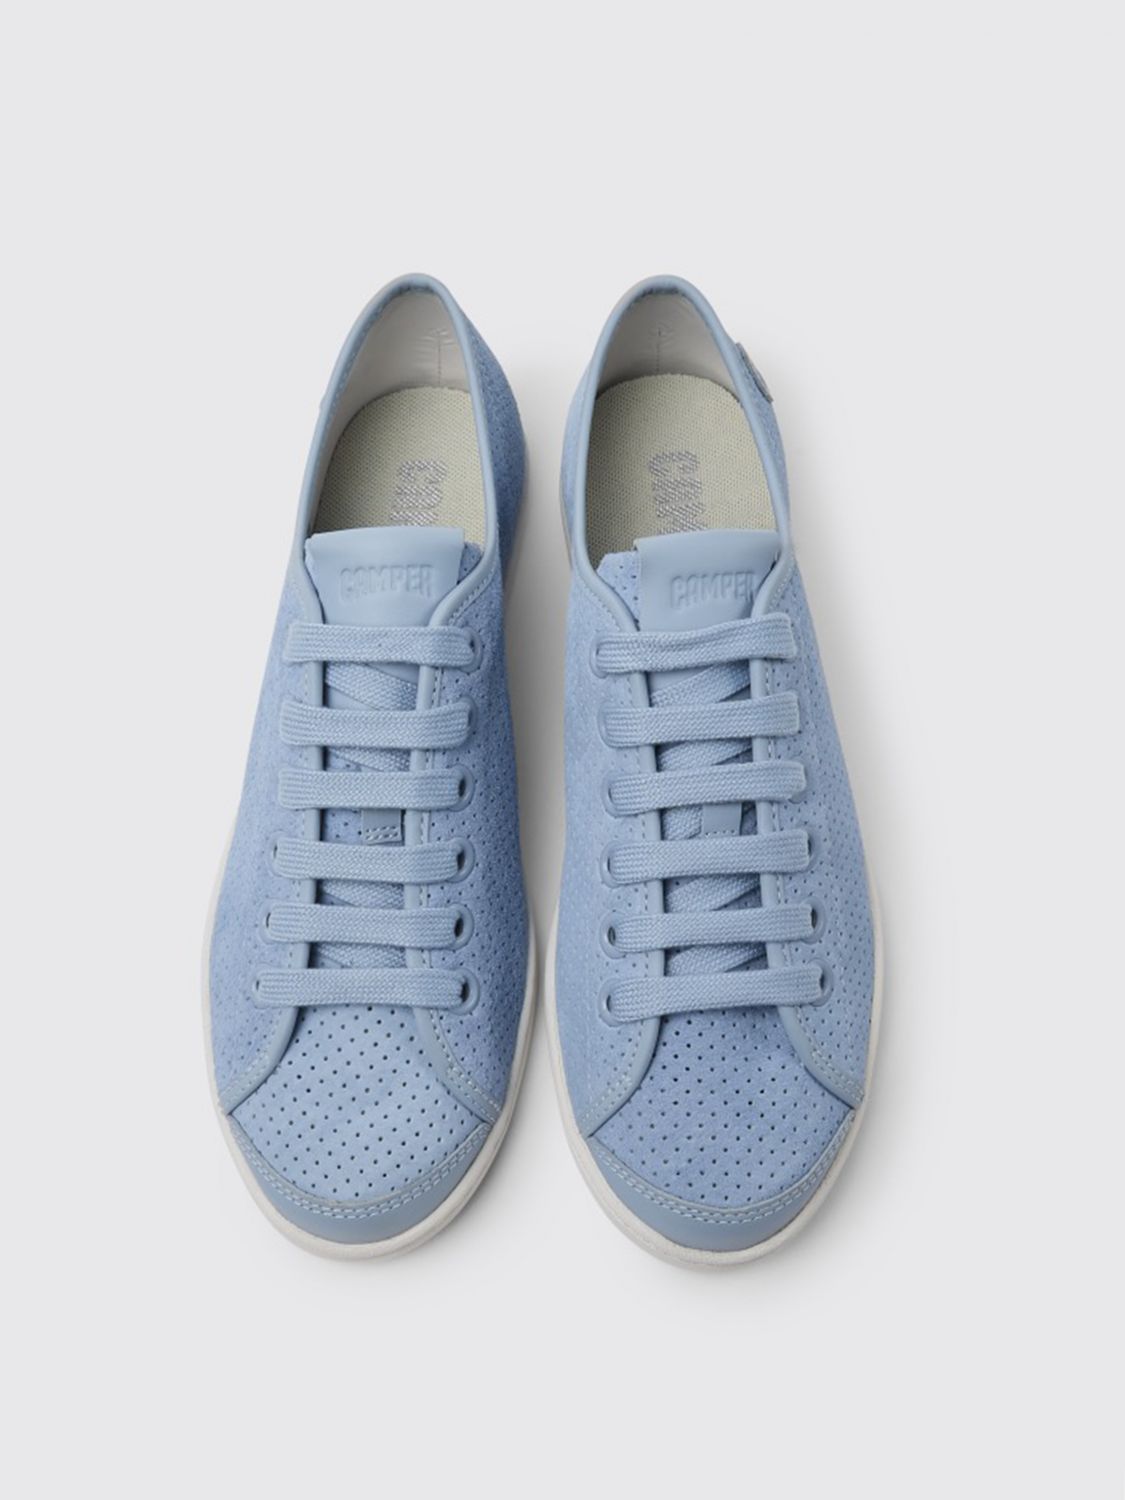 Lydighed undersøgelse Døds kæbe Camper Outlet: Uno sneakers in perforated leather - Blue | Camper sneakers  21815-070 UNO online on GIGLIO.COM